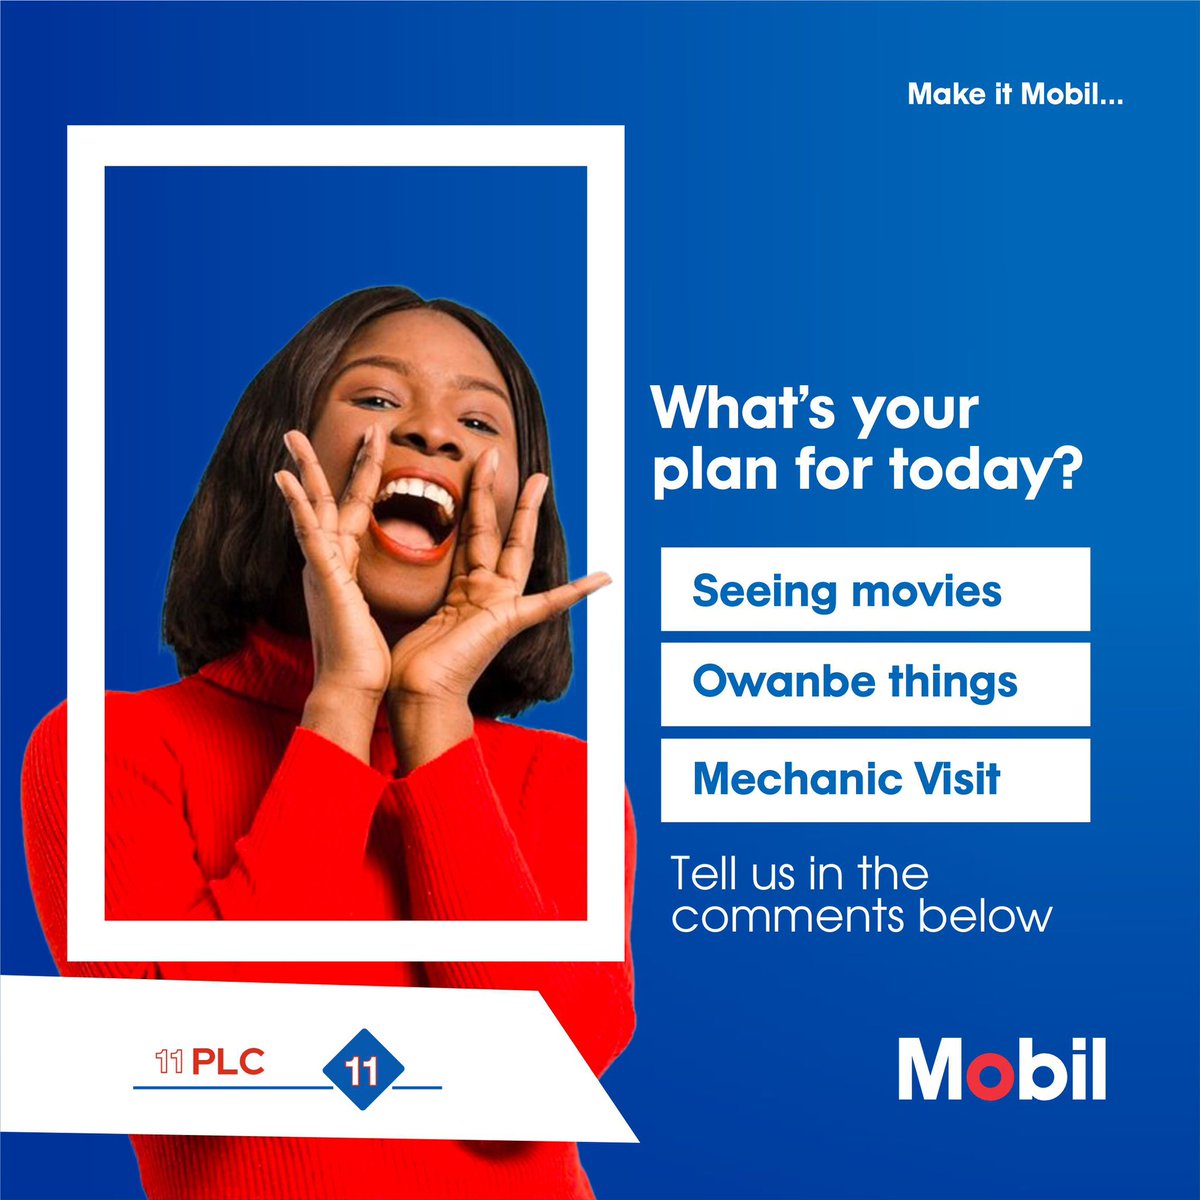 What’s your plan for today, are you seeing movies, going for owanbe or visiting the mechanic workshop. Drop your comments below 👇 

#mobillubricantes #mobilengineoil #mobilsuperoil #carmaintenance #weekendvibes